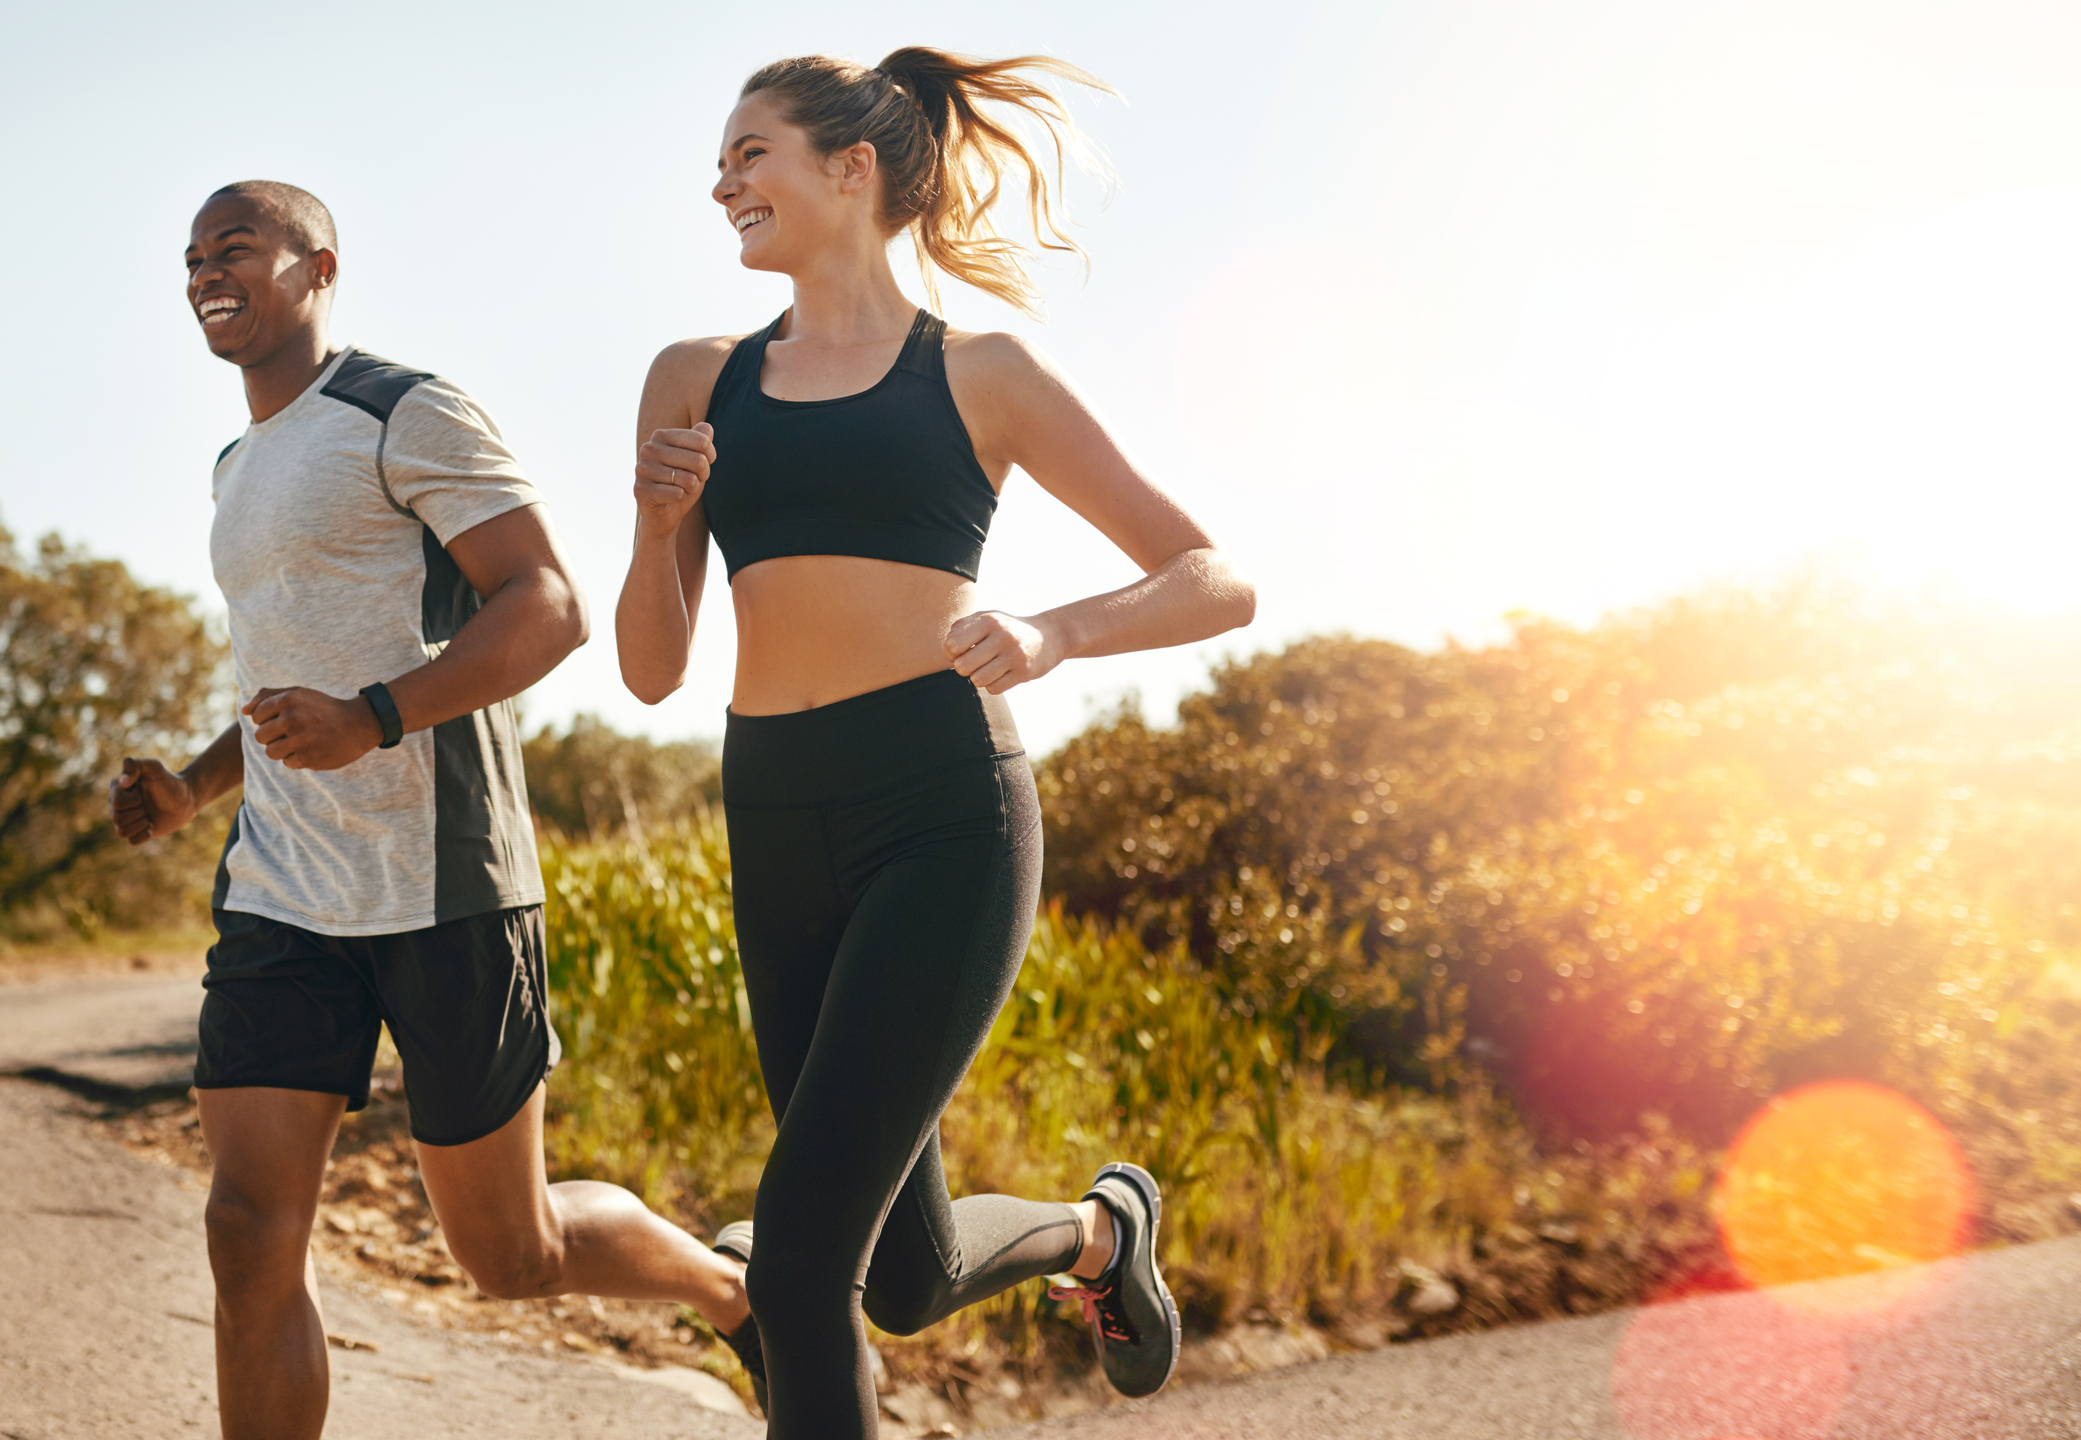 A man and woman in sports clothes are smiling as they run down a path with the sun behind them.